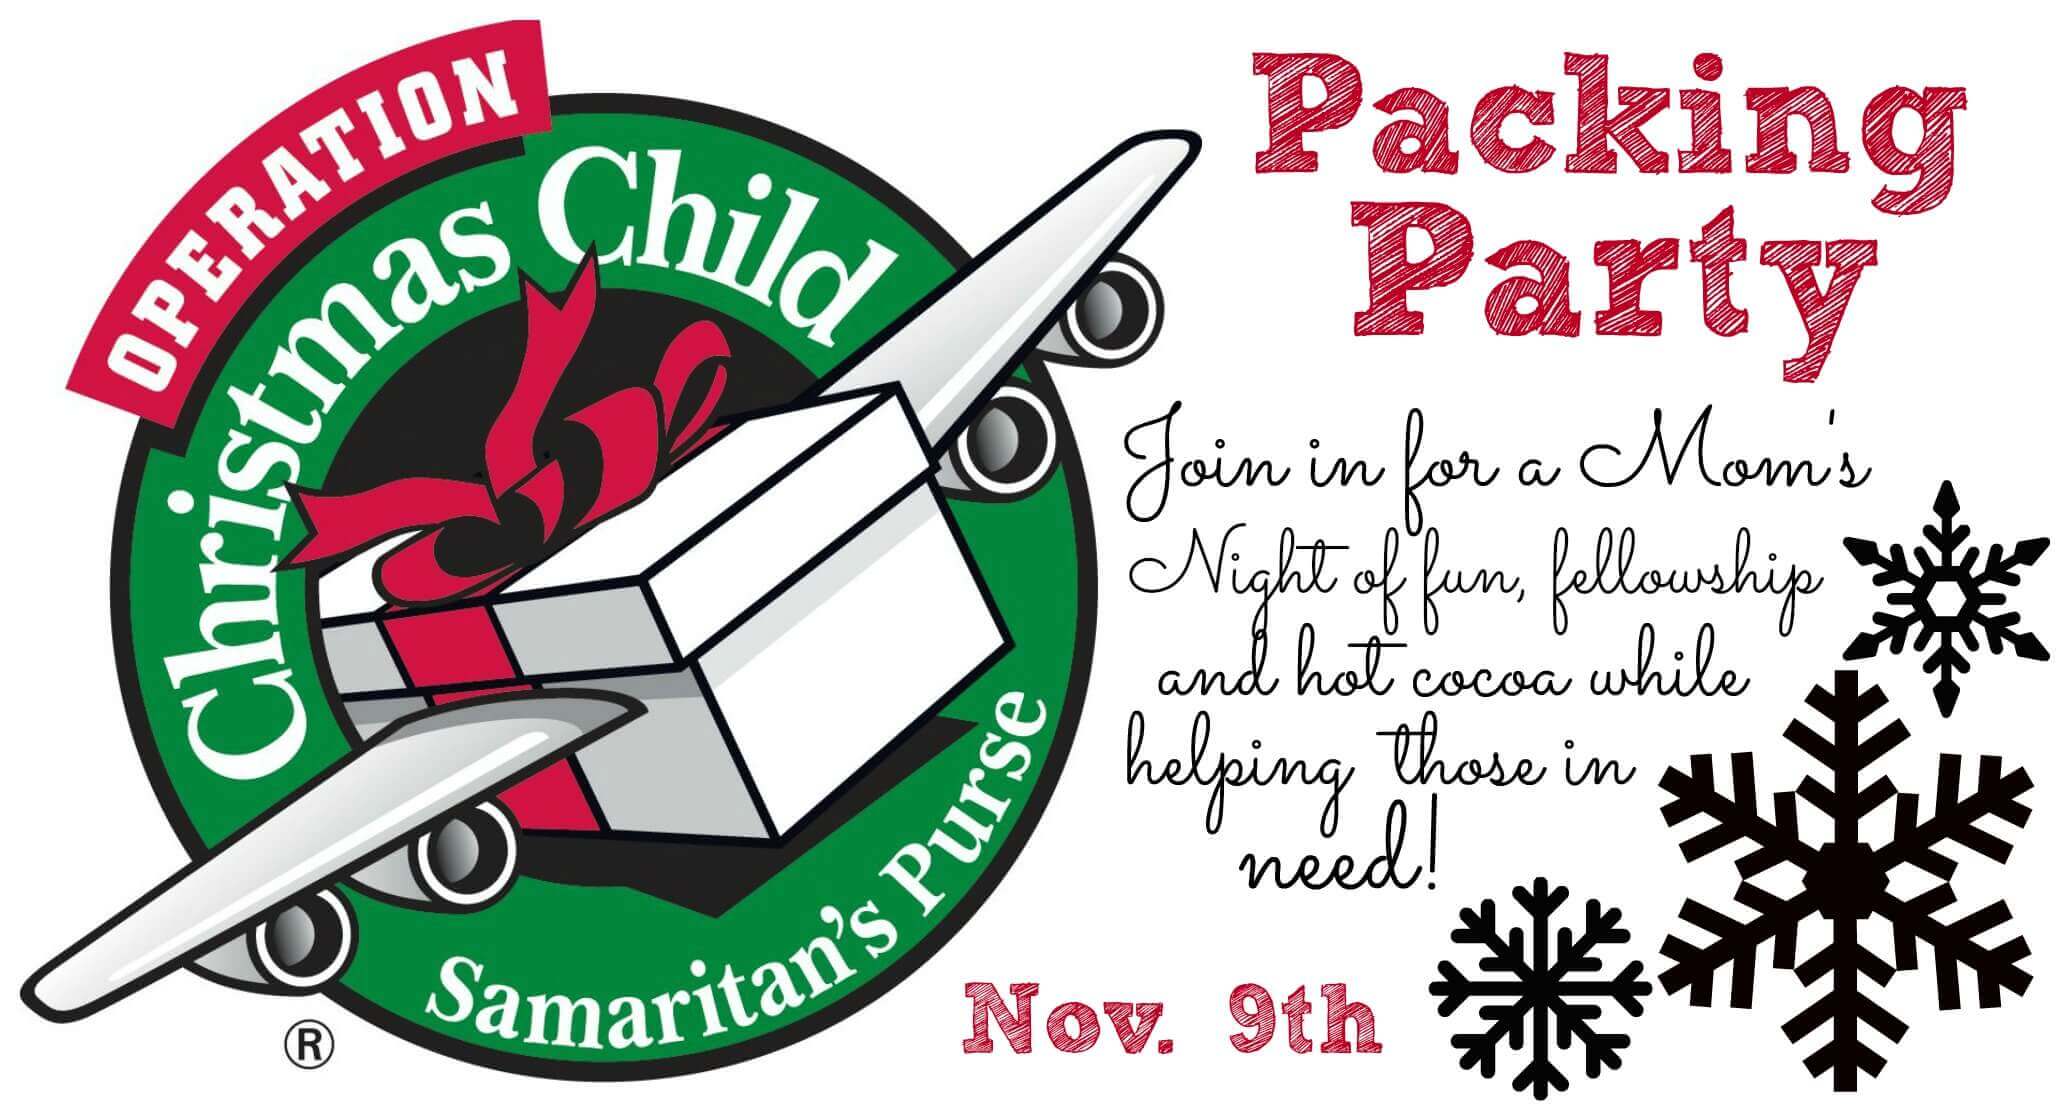 Operation Christmas Child Party 2013